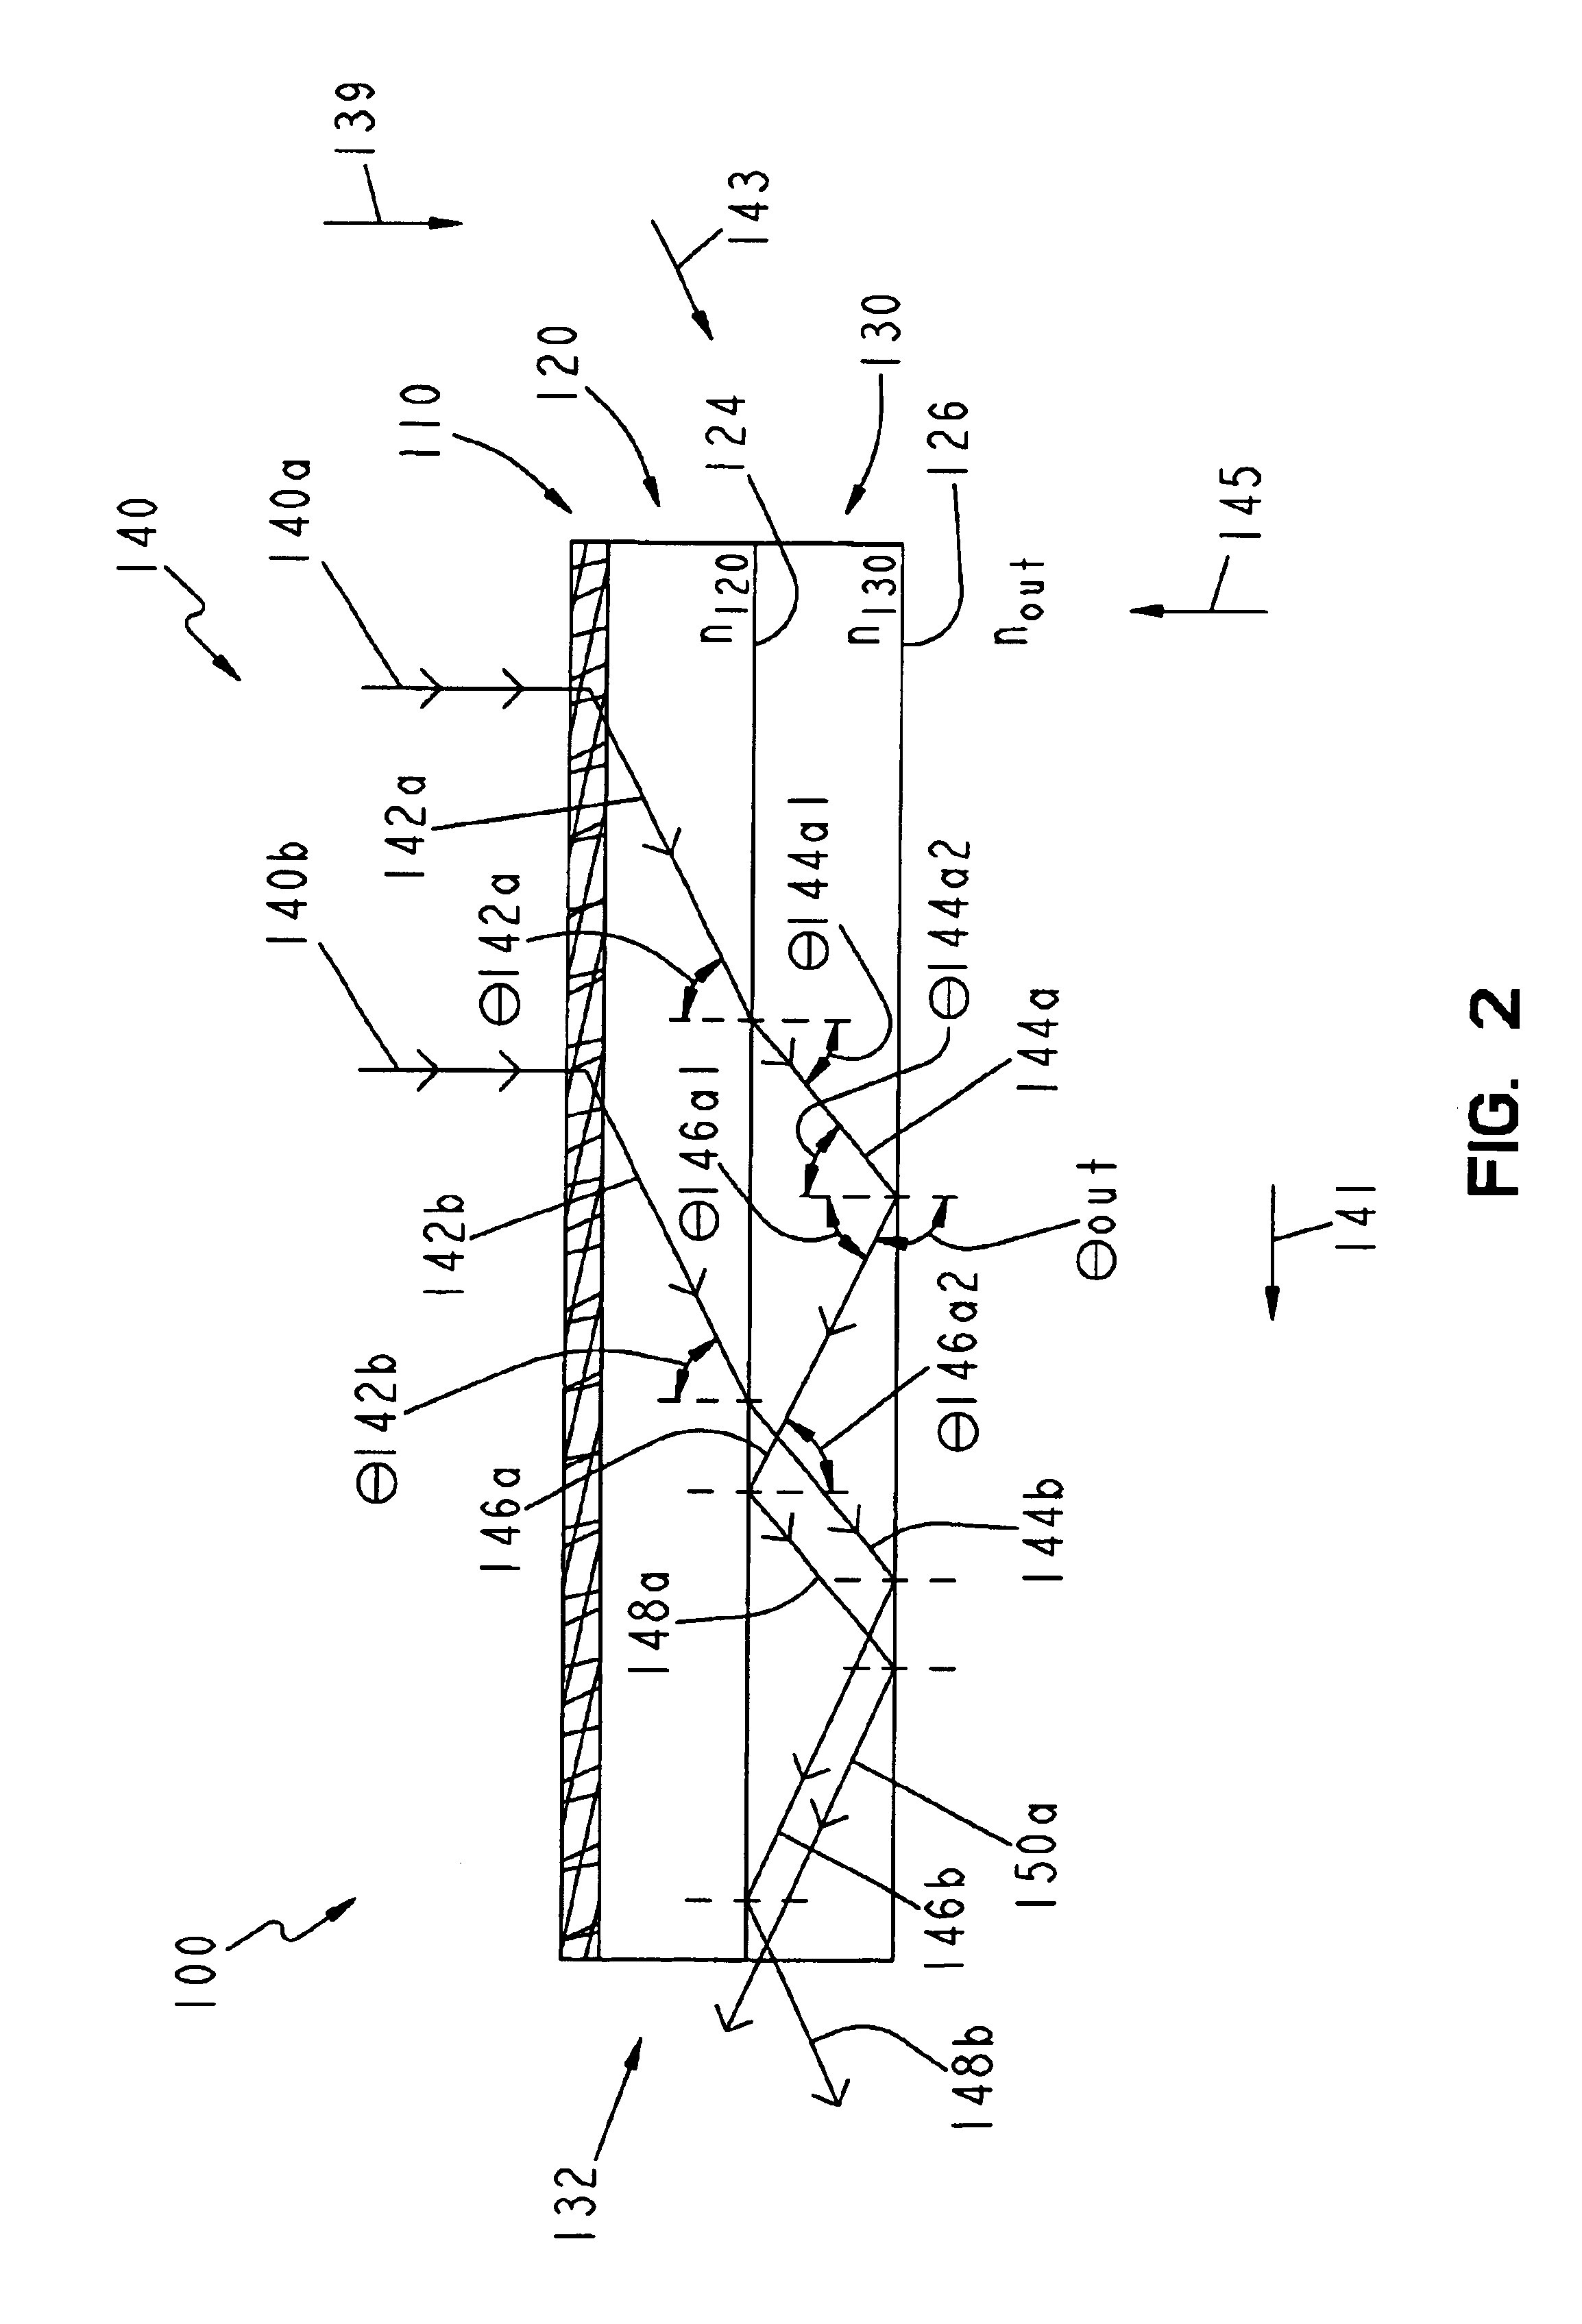 Electromagnetic radiation collector and transport system